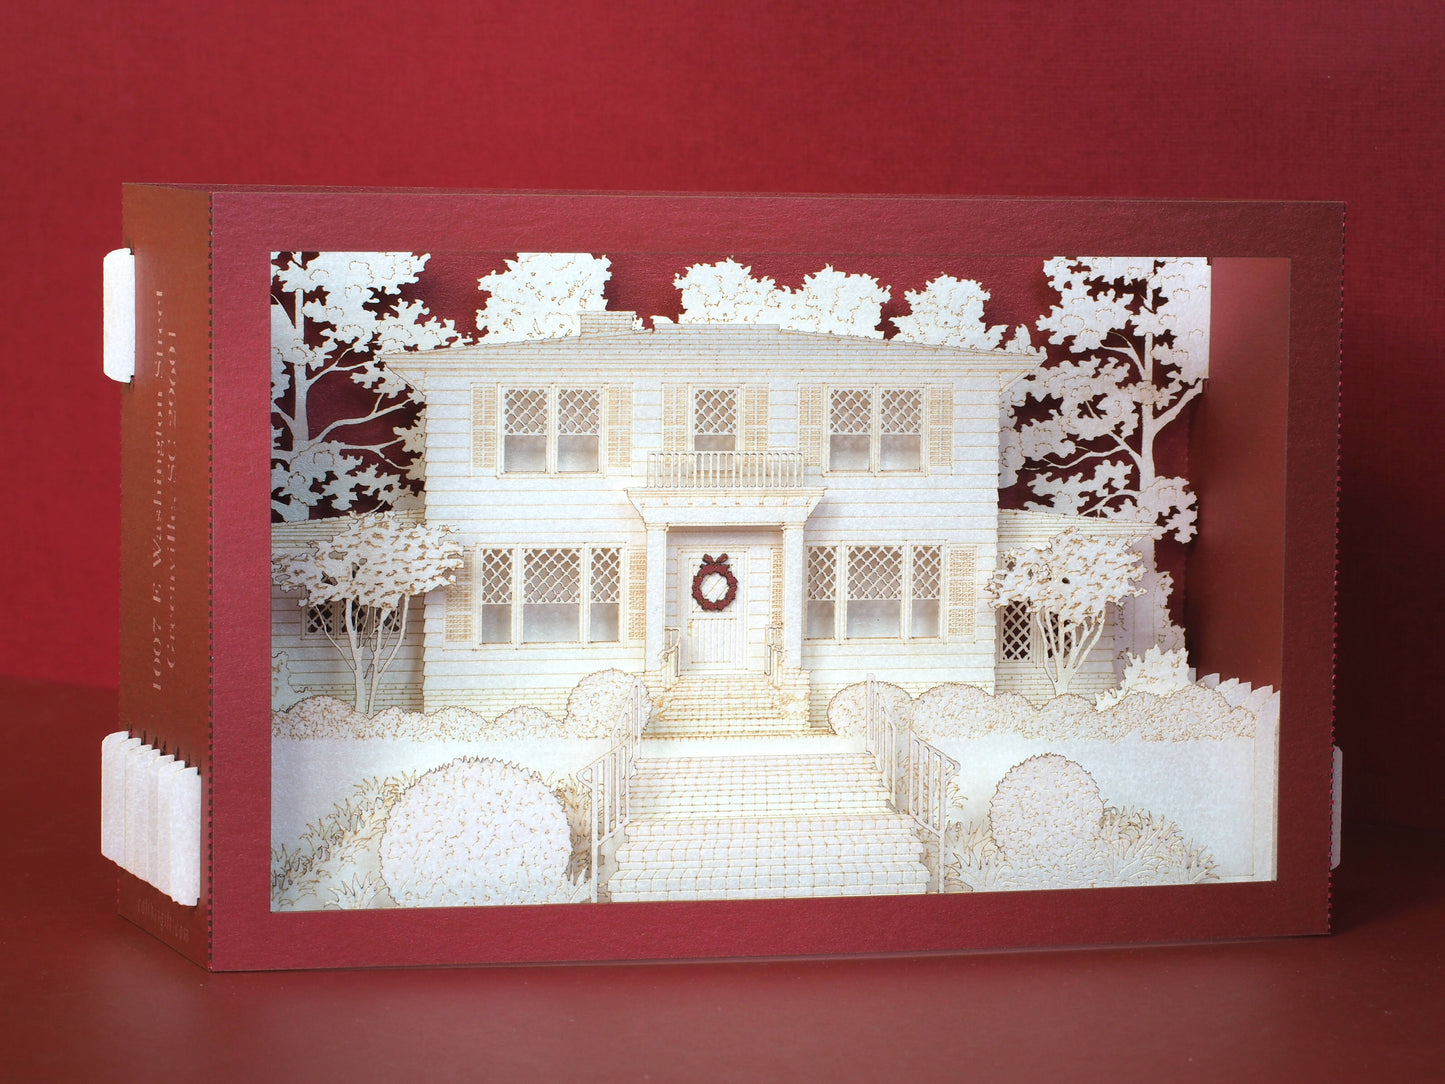 Paper pop up 3d miniature building, house, villa, architecture. Custom design to order. Promo gift with logo